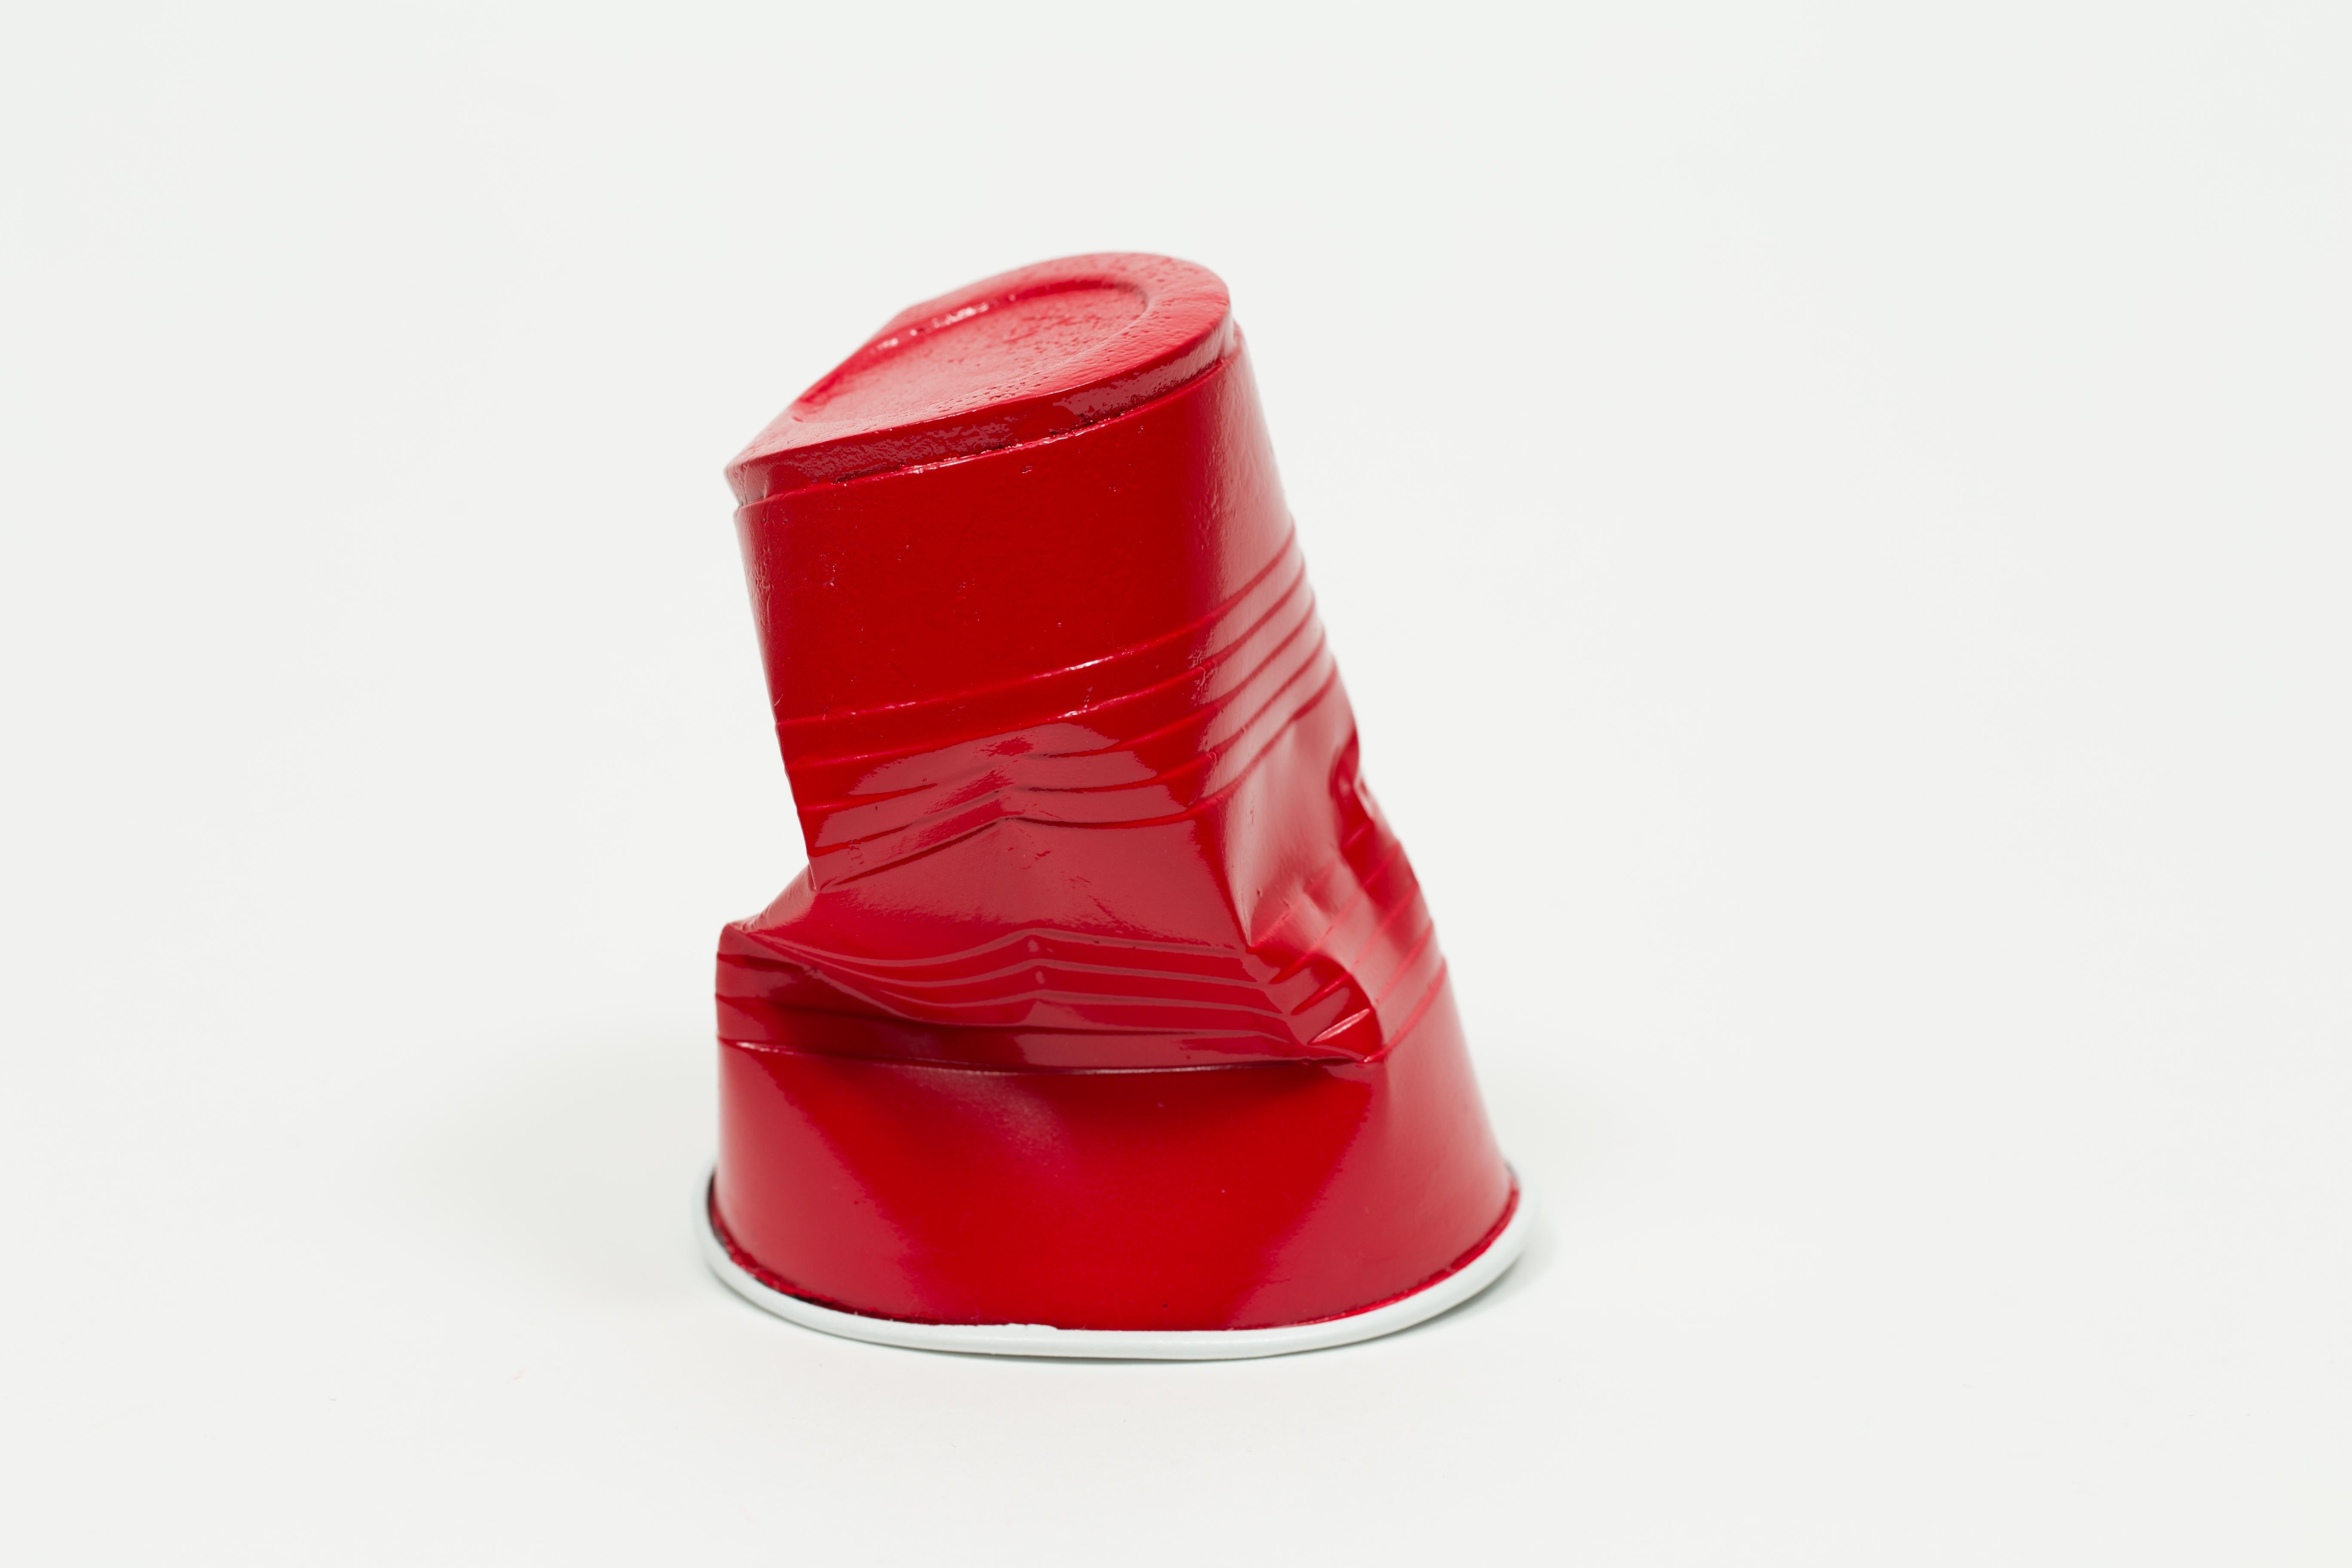 Cup #5 - Contemporary Sculpture by Zeke Moores